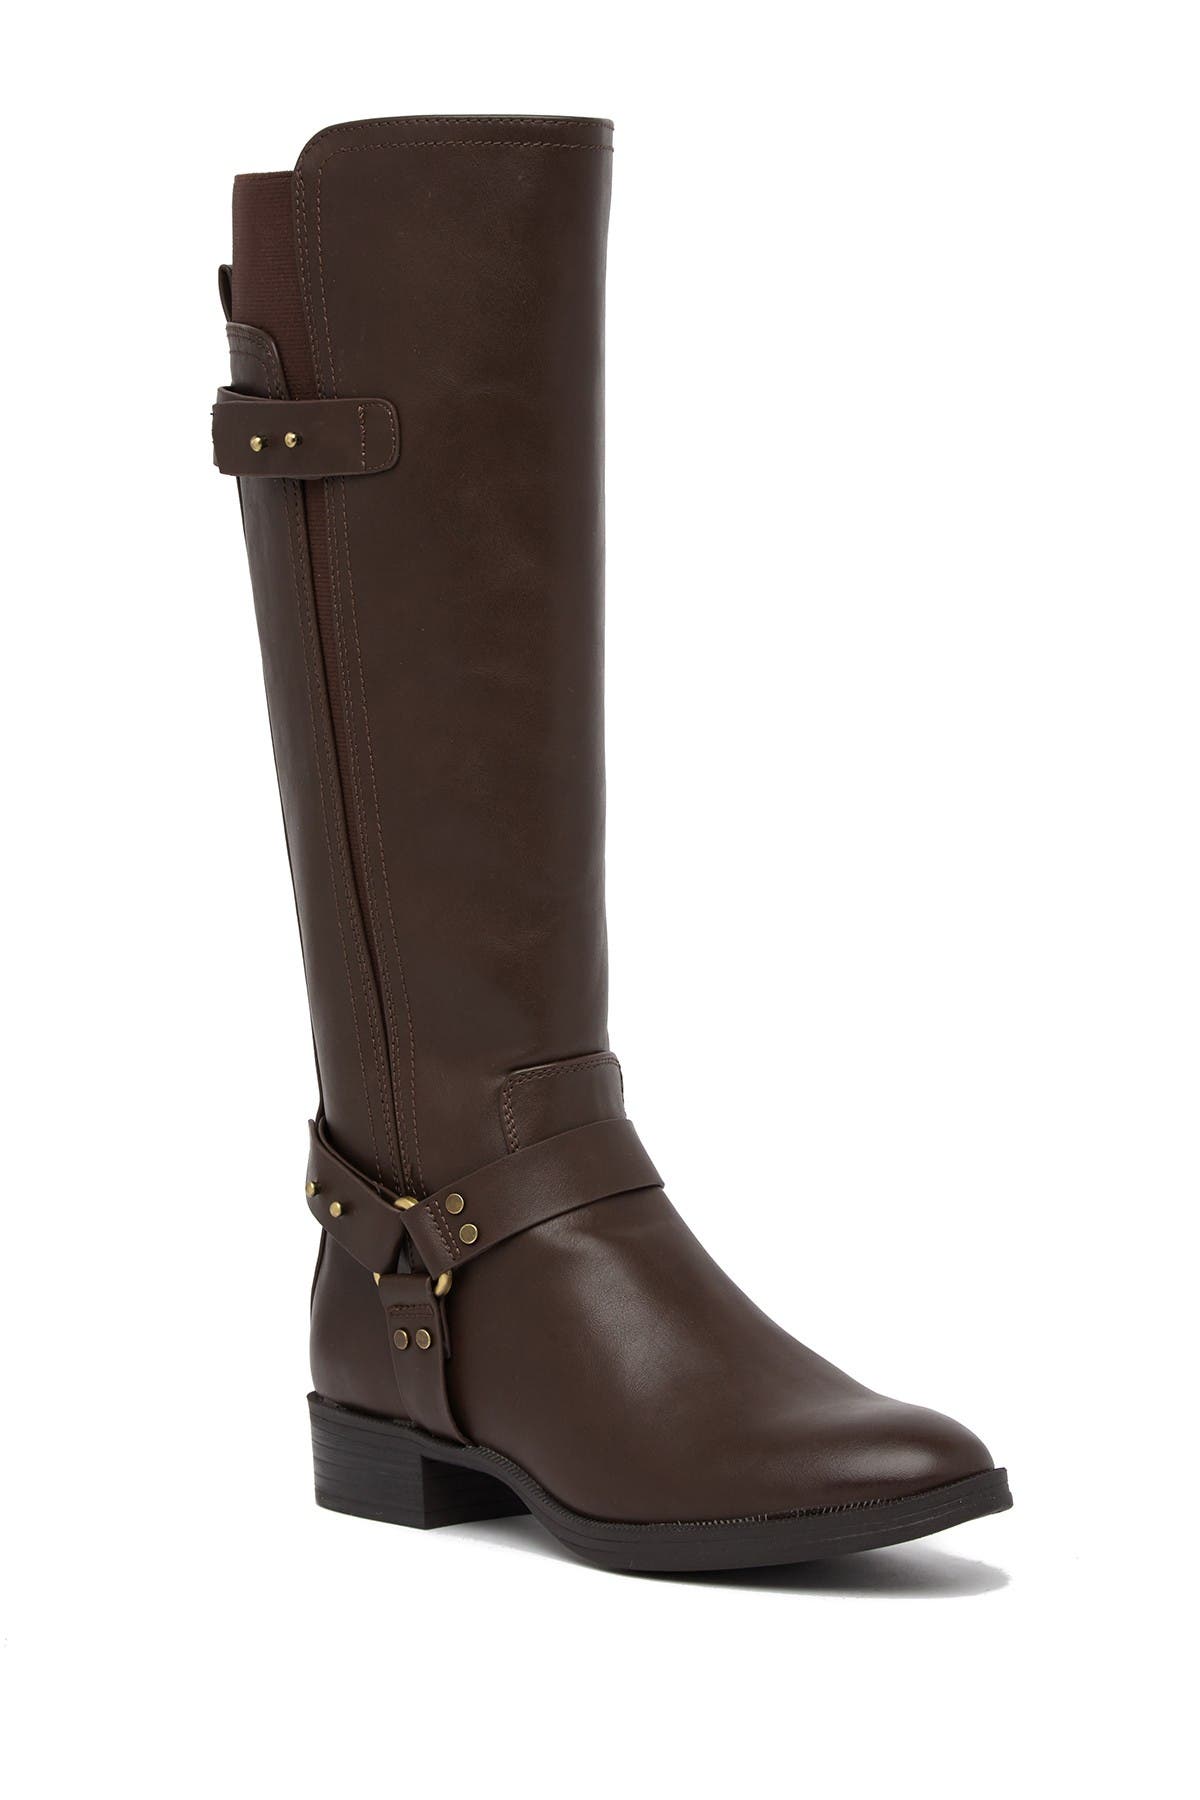 circus by sam edelman over the knee boots